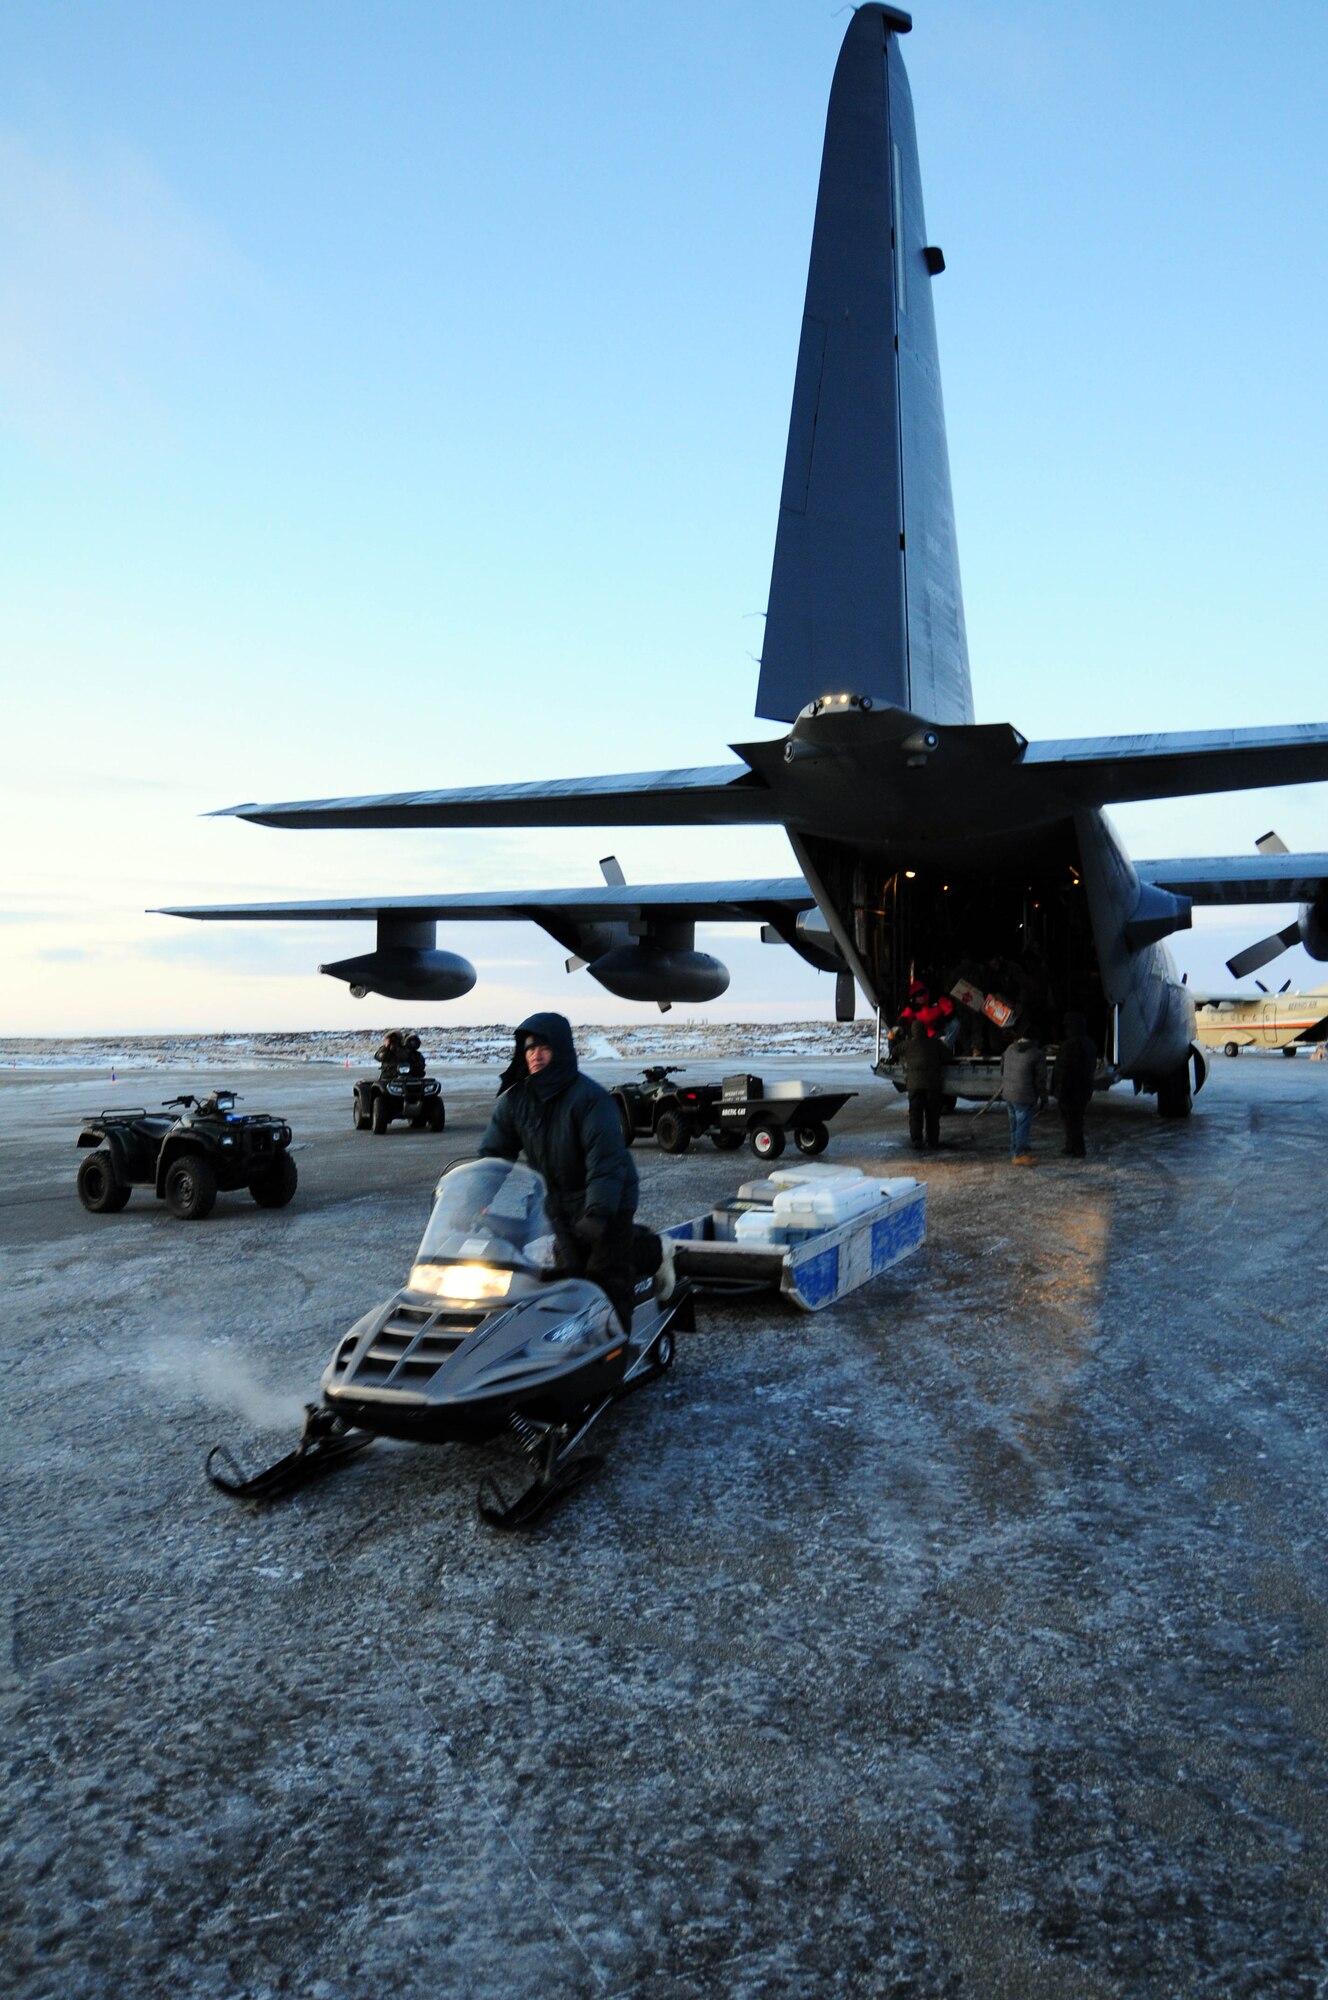 Gambell resident Merle Kaningok, an employee of the Gambell Public School,
hauls a load of toys and Christmas goodies away from an Alaska Air National Guard HC-130 transport aircraft. The Alaska Air and Army National Guard were in Gambell, on remote St. Lawrence Island in the Bering Sea, with a group of civilian volunteers as part of Operation Santa Claus 2009. Now in its 53rd year, Operation Santa Claus is a program of the Alaska National Guard to bring toys, food, supplies and Christmas cheer to isolated villages around the state. Alaska Air National Guard photo by 1st. Lt. John Callahan.